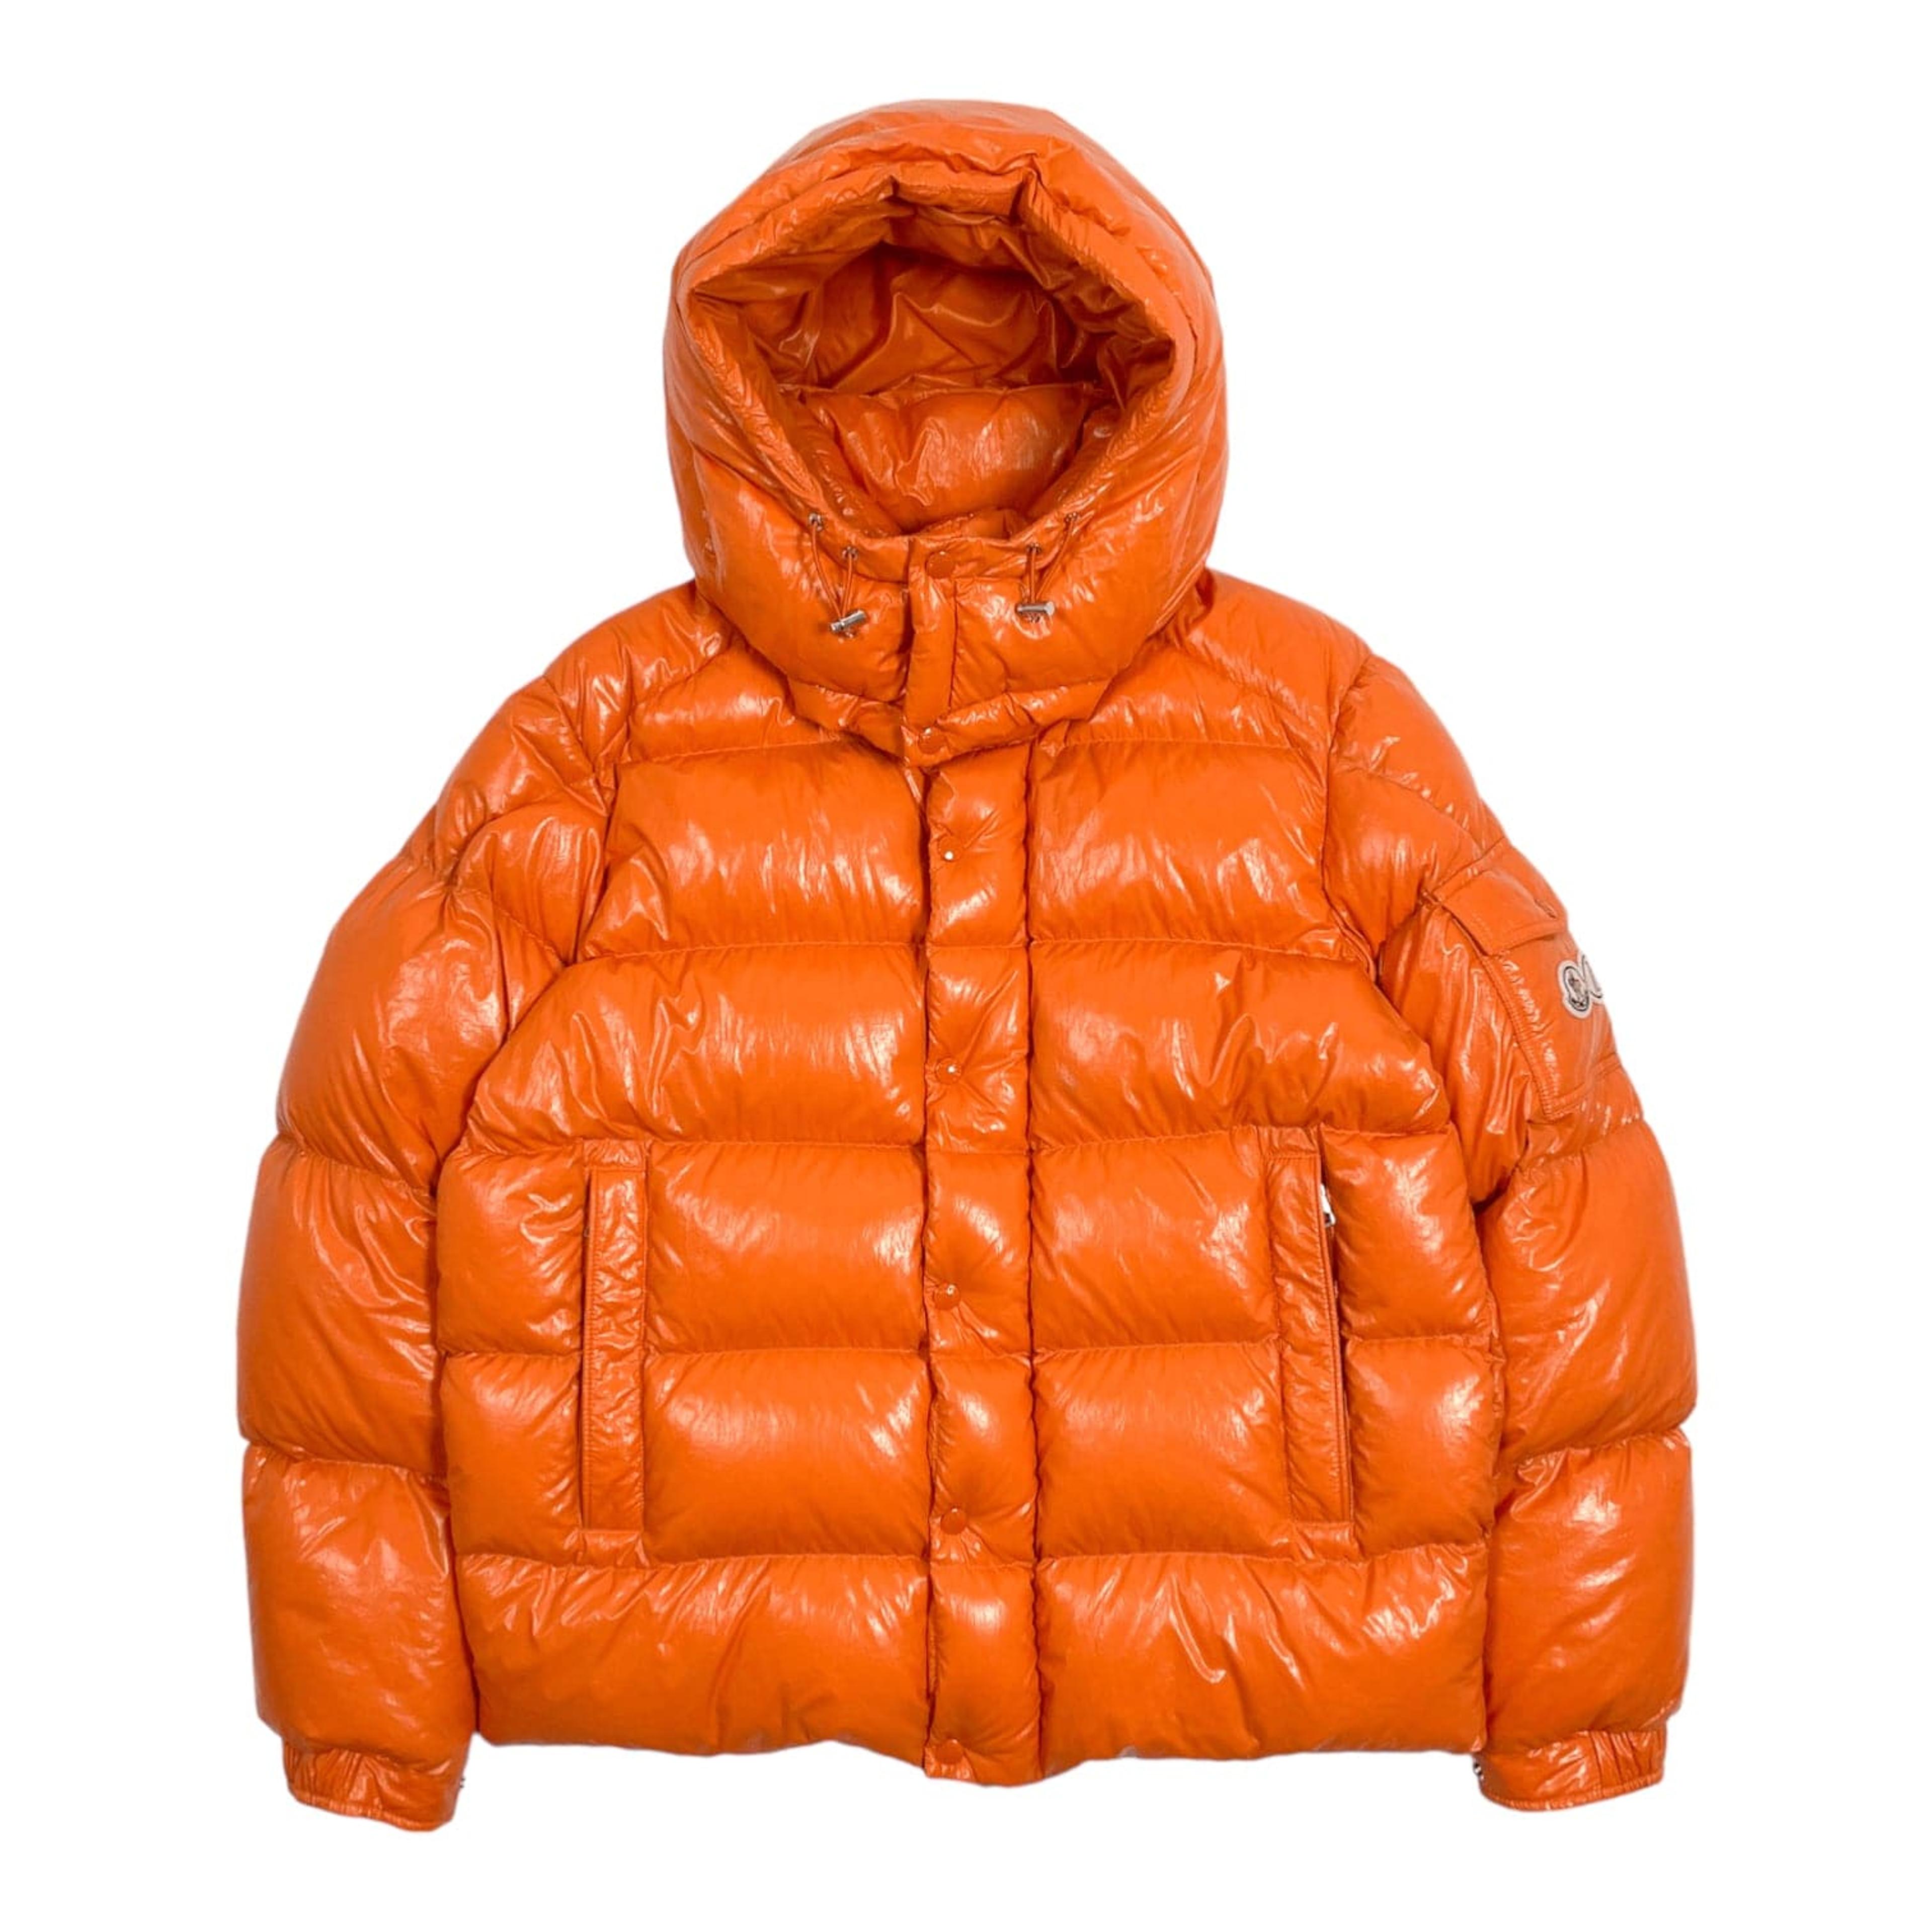 Alternate View 1 of Moncler Maya 70th Anniversary Special Edition Campfire Orange